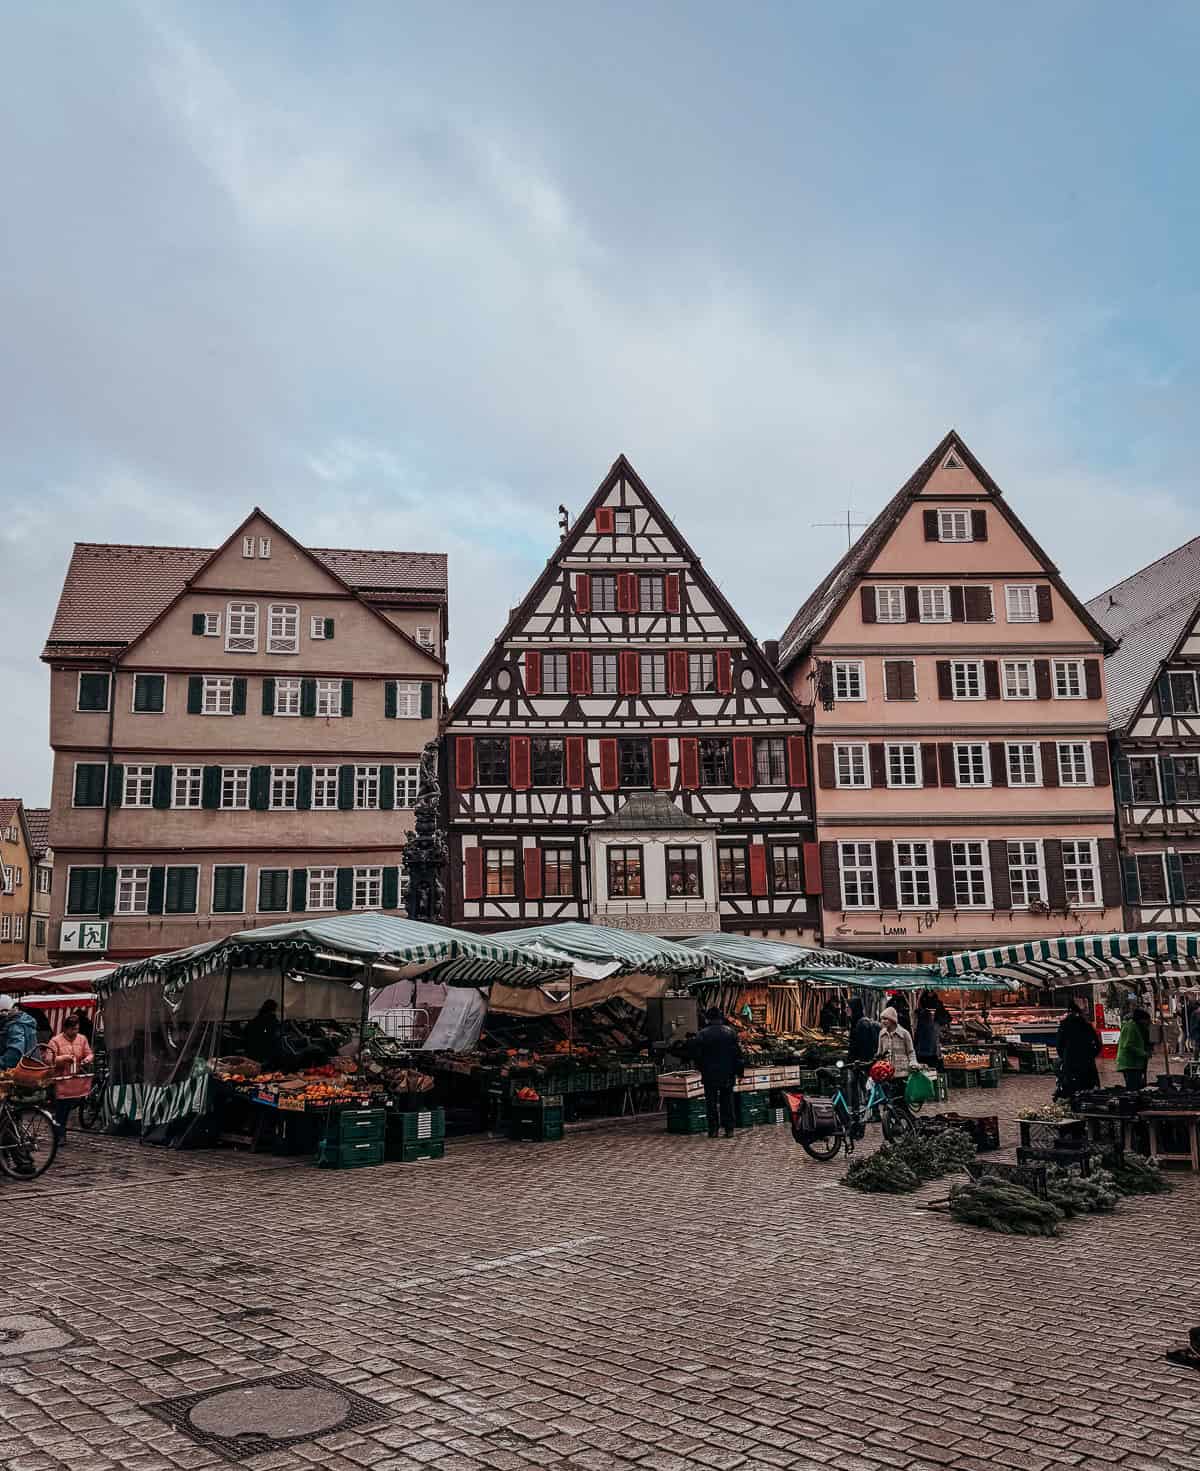 Outdoor market scene in Tübingen with fruit and vegetable stalls set up in front of traditional half-timbered houses